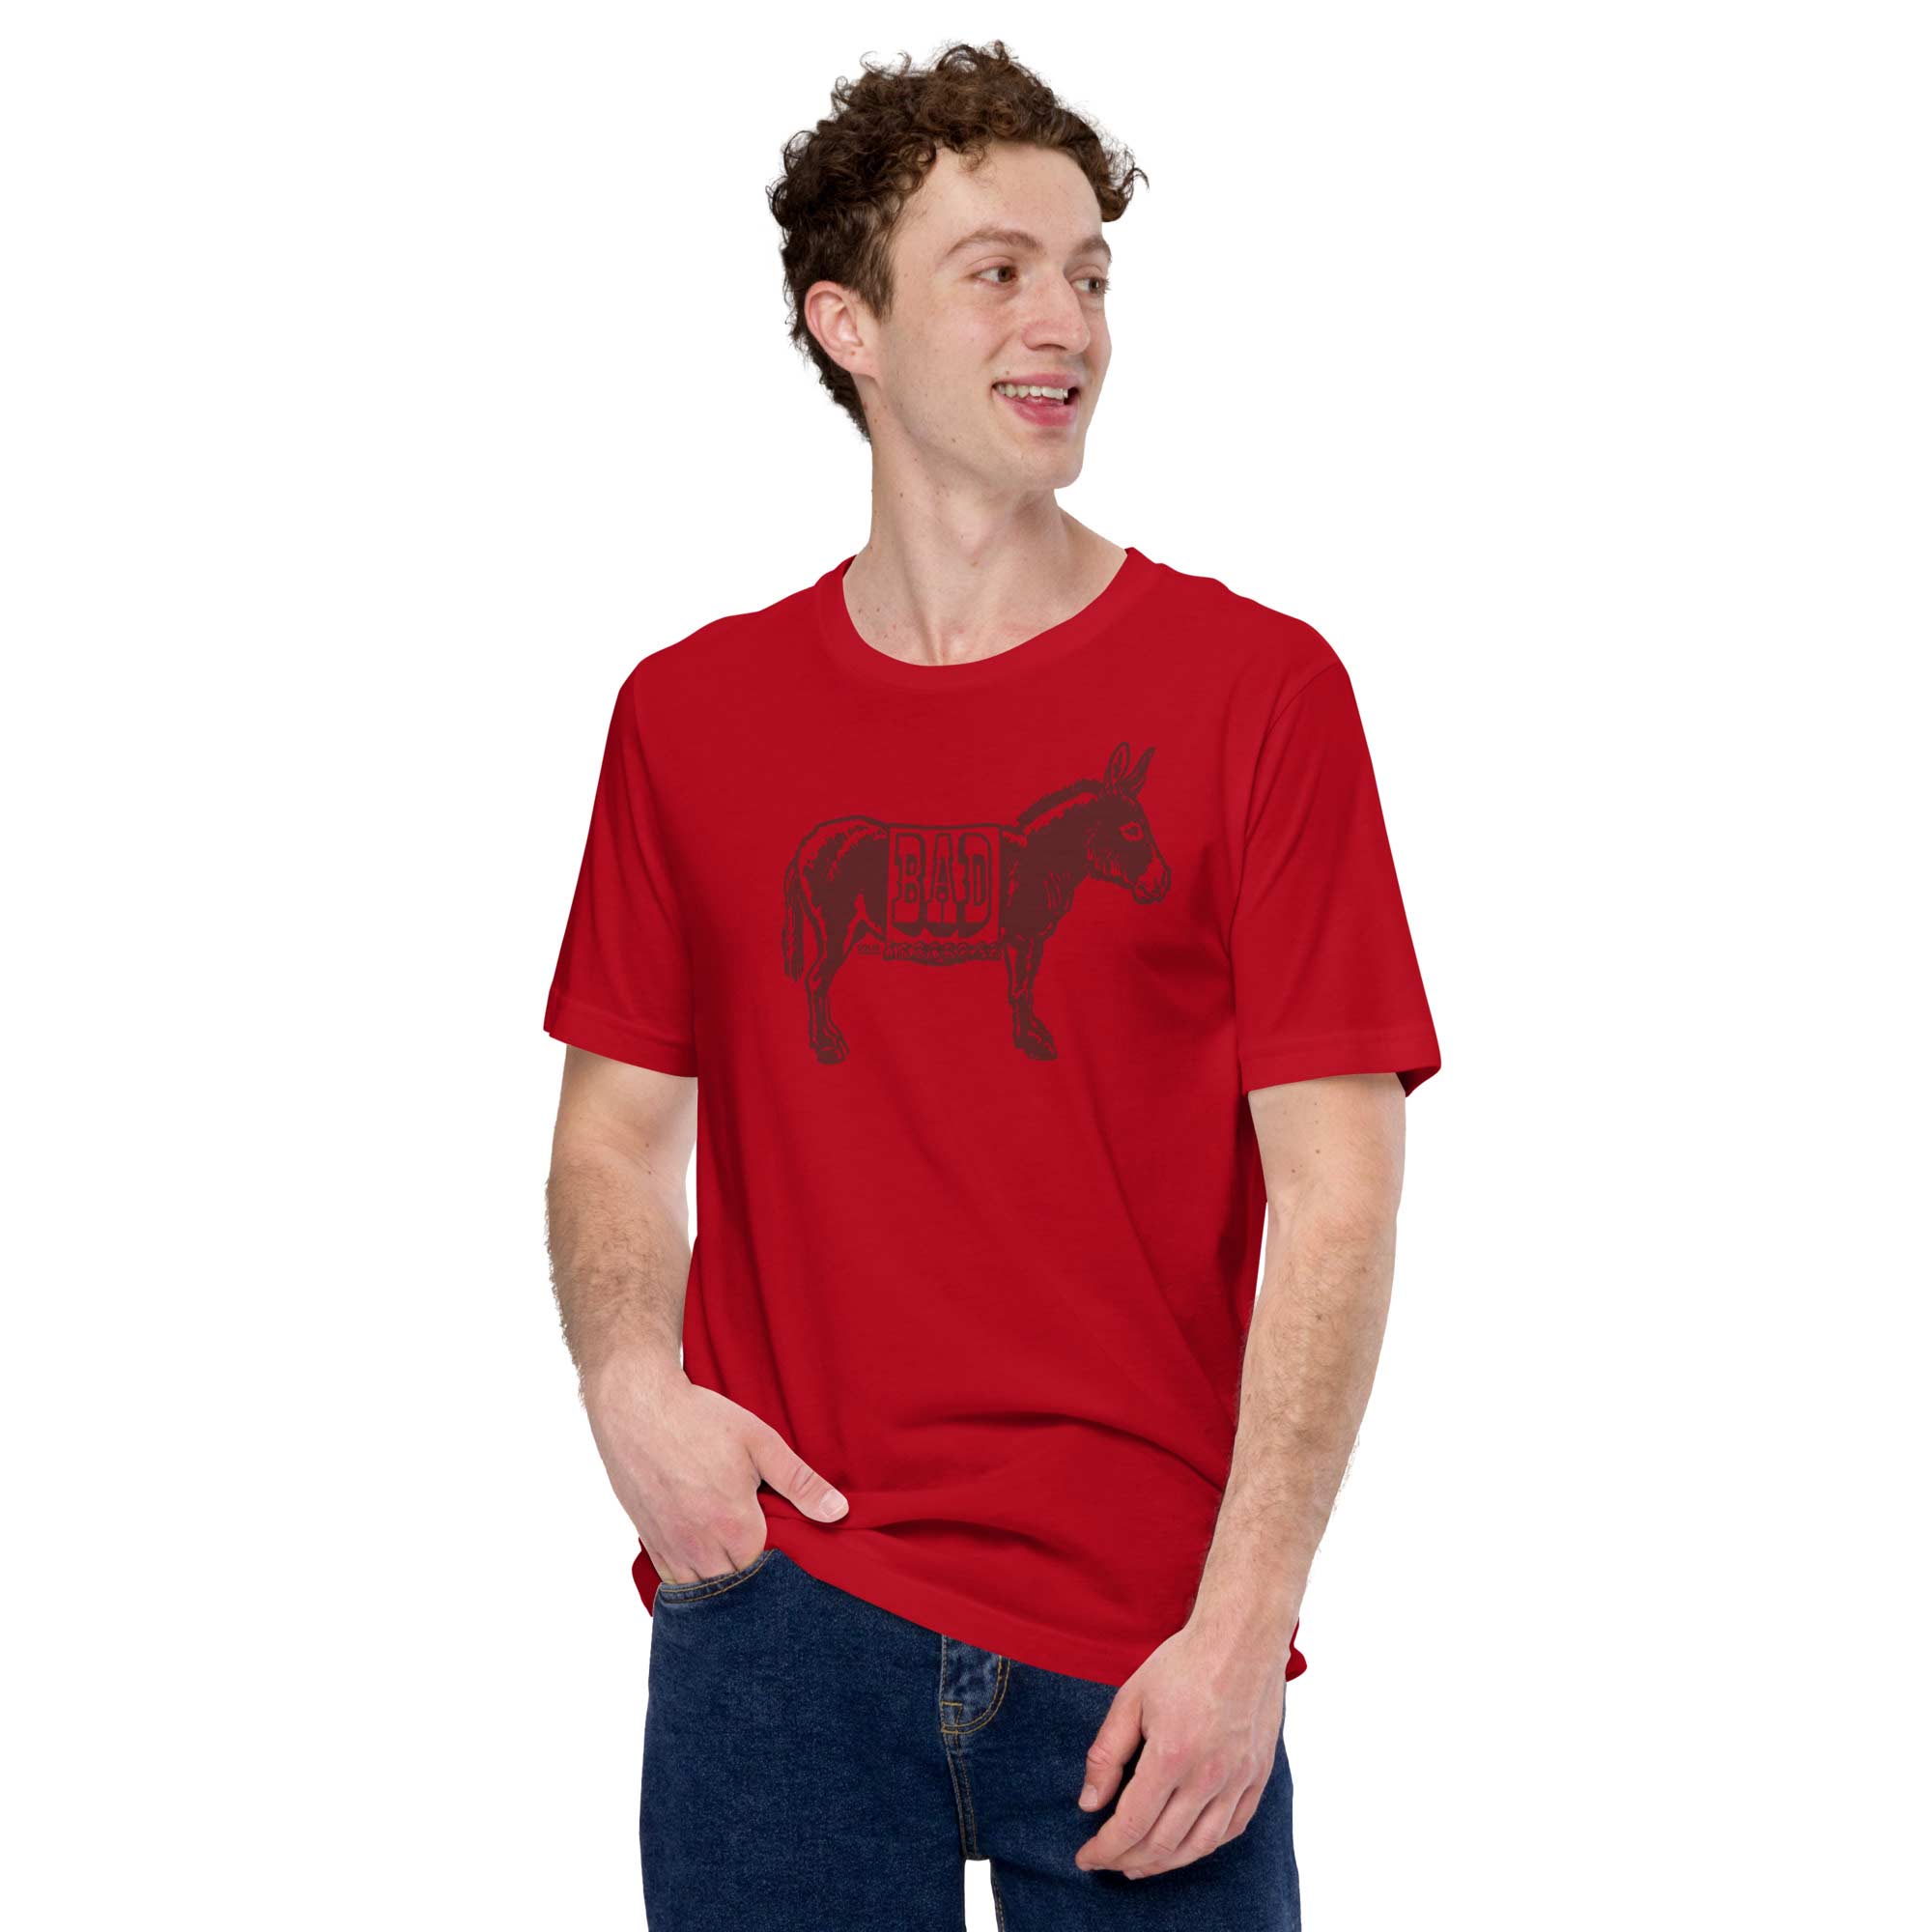 Men's Bad Ass Vintage Graphic Tee | Funny Donkey 100% Cotton T-shirt - Solid Threads